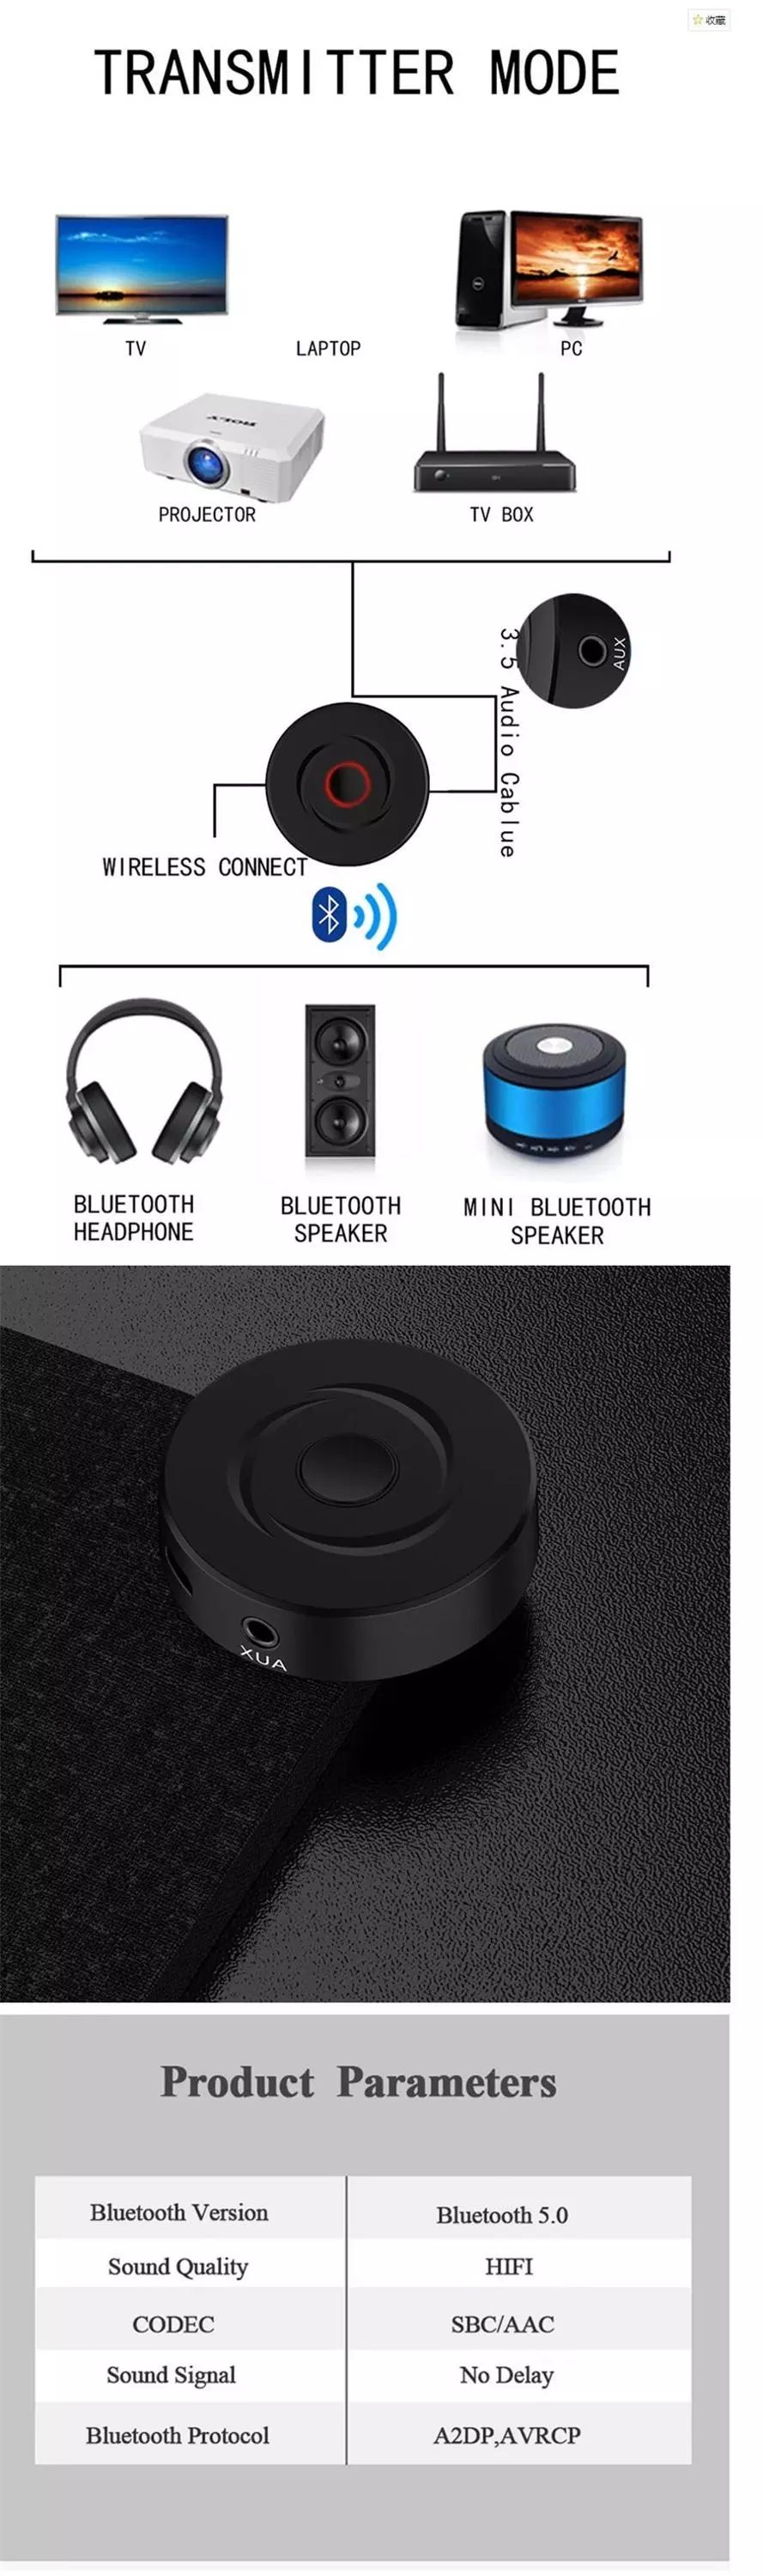 Bakeey-2-In-1-bluetooth-50-Receiver-Transmitte-RCA-35mm-AUX-Jack-Stereo-Music-Audio-Wireless-Adapter-1752159